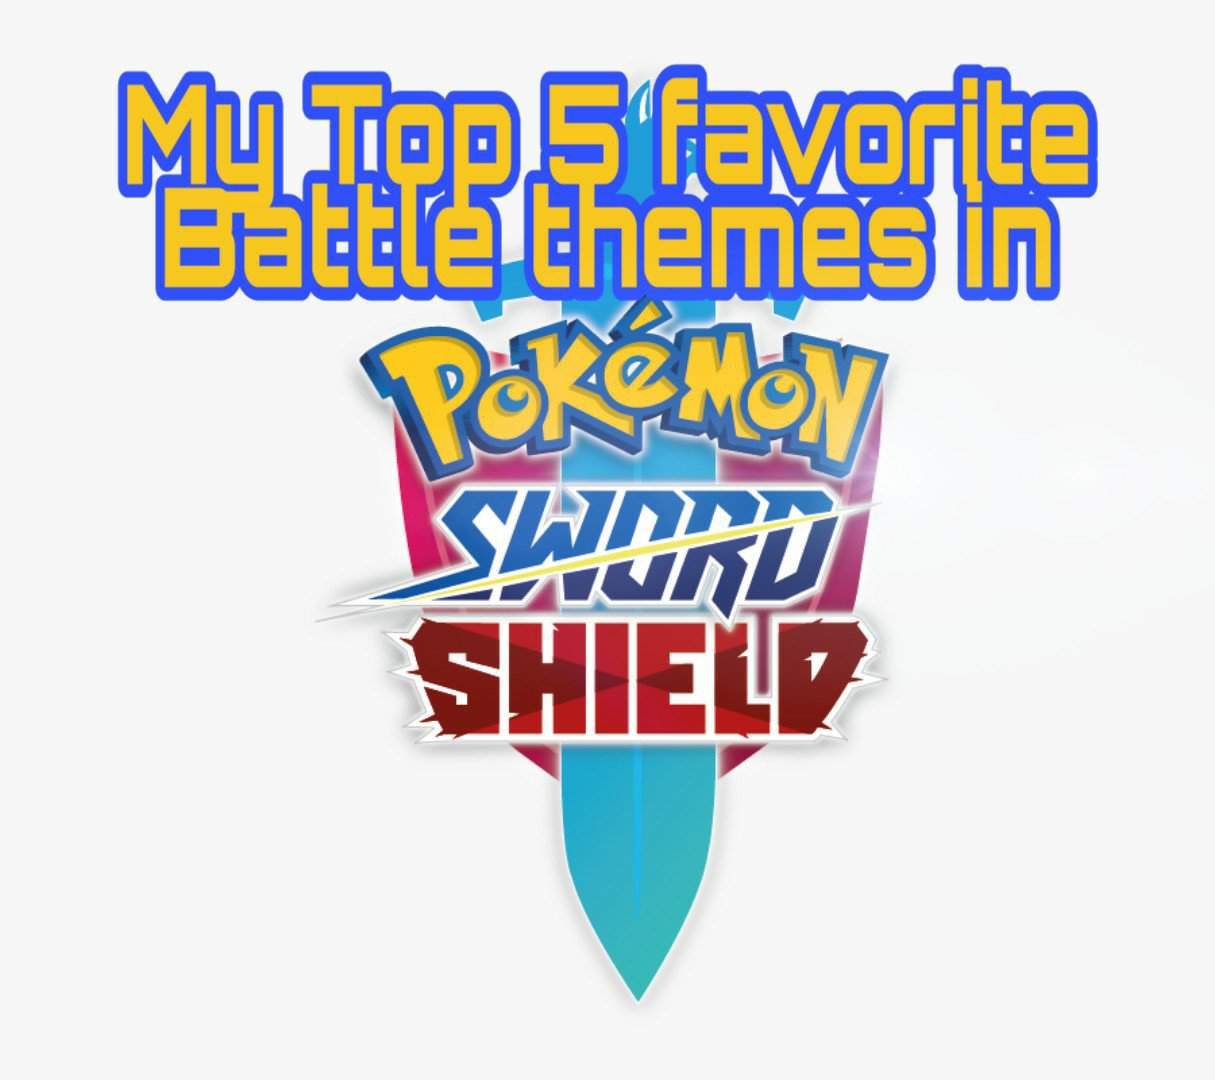 Spoilers My Top 5 Favorite Battle Themes In Pokemon Sword And